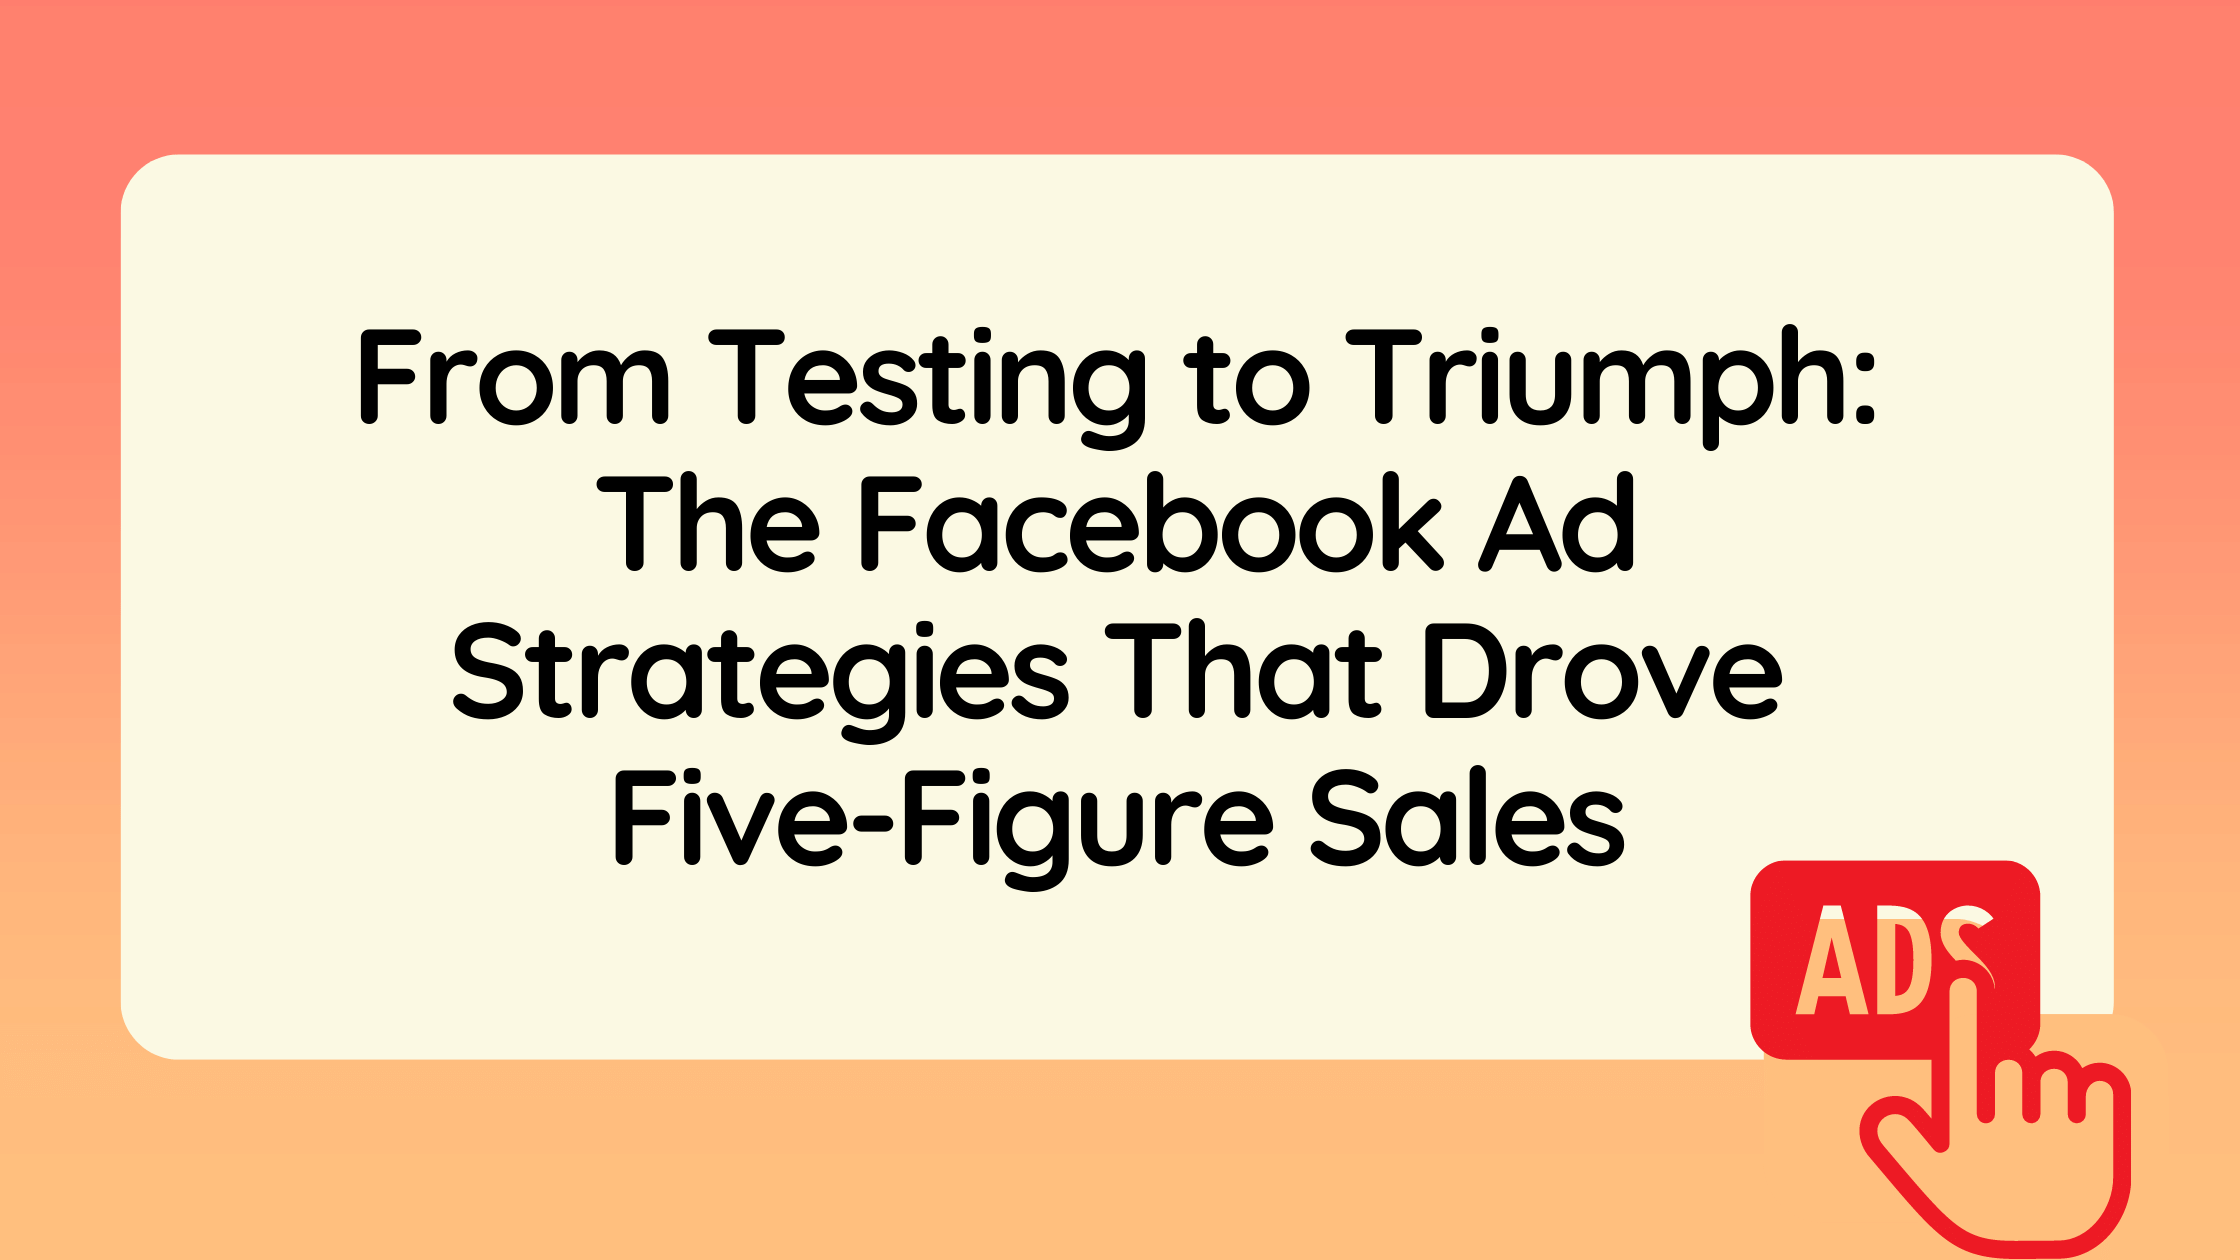 From Testing to Triumph: The Facebook Ad Strategies That Drove Five-Figure Sales